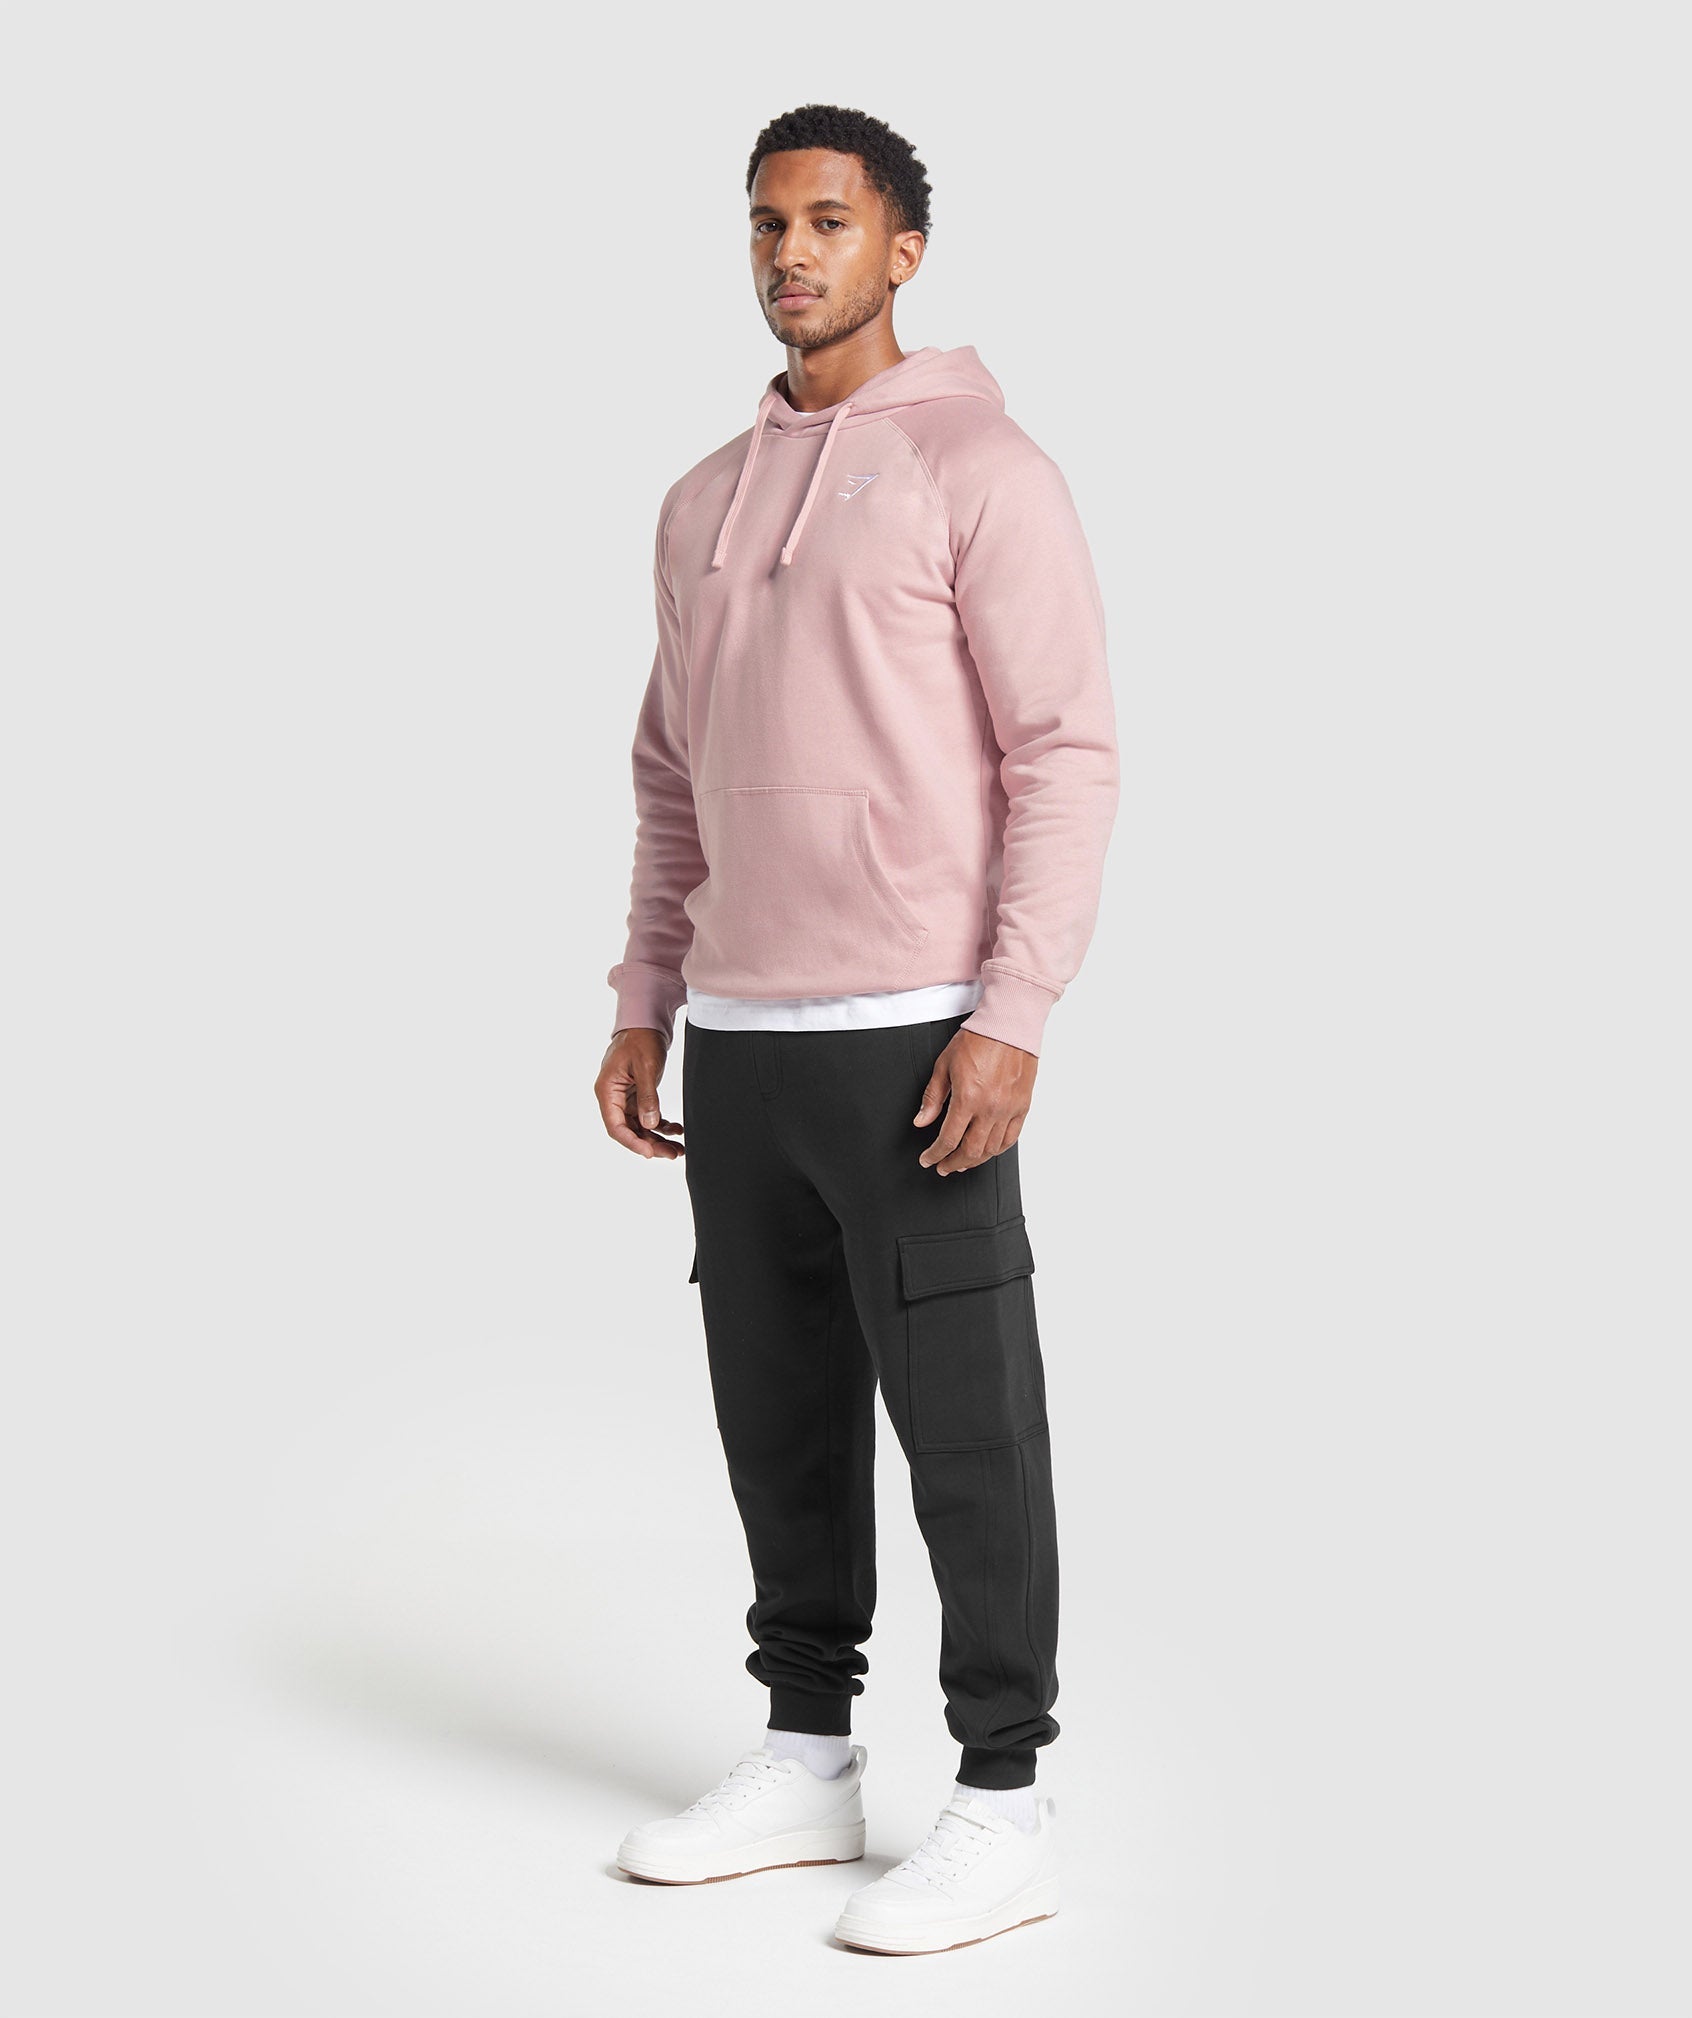 Crest Hoodie in Light Pink - view 4